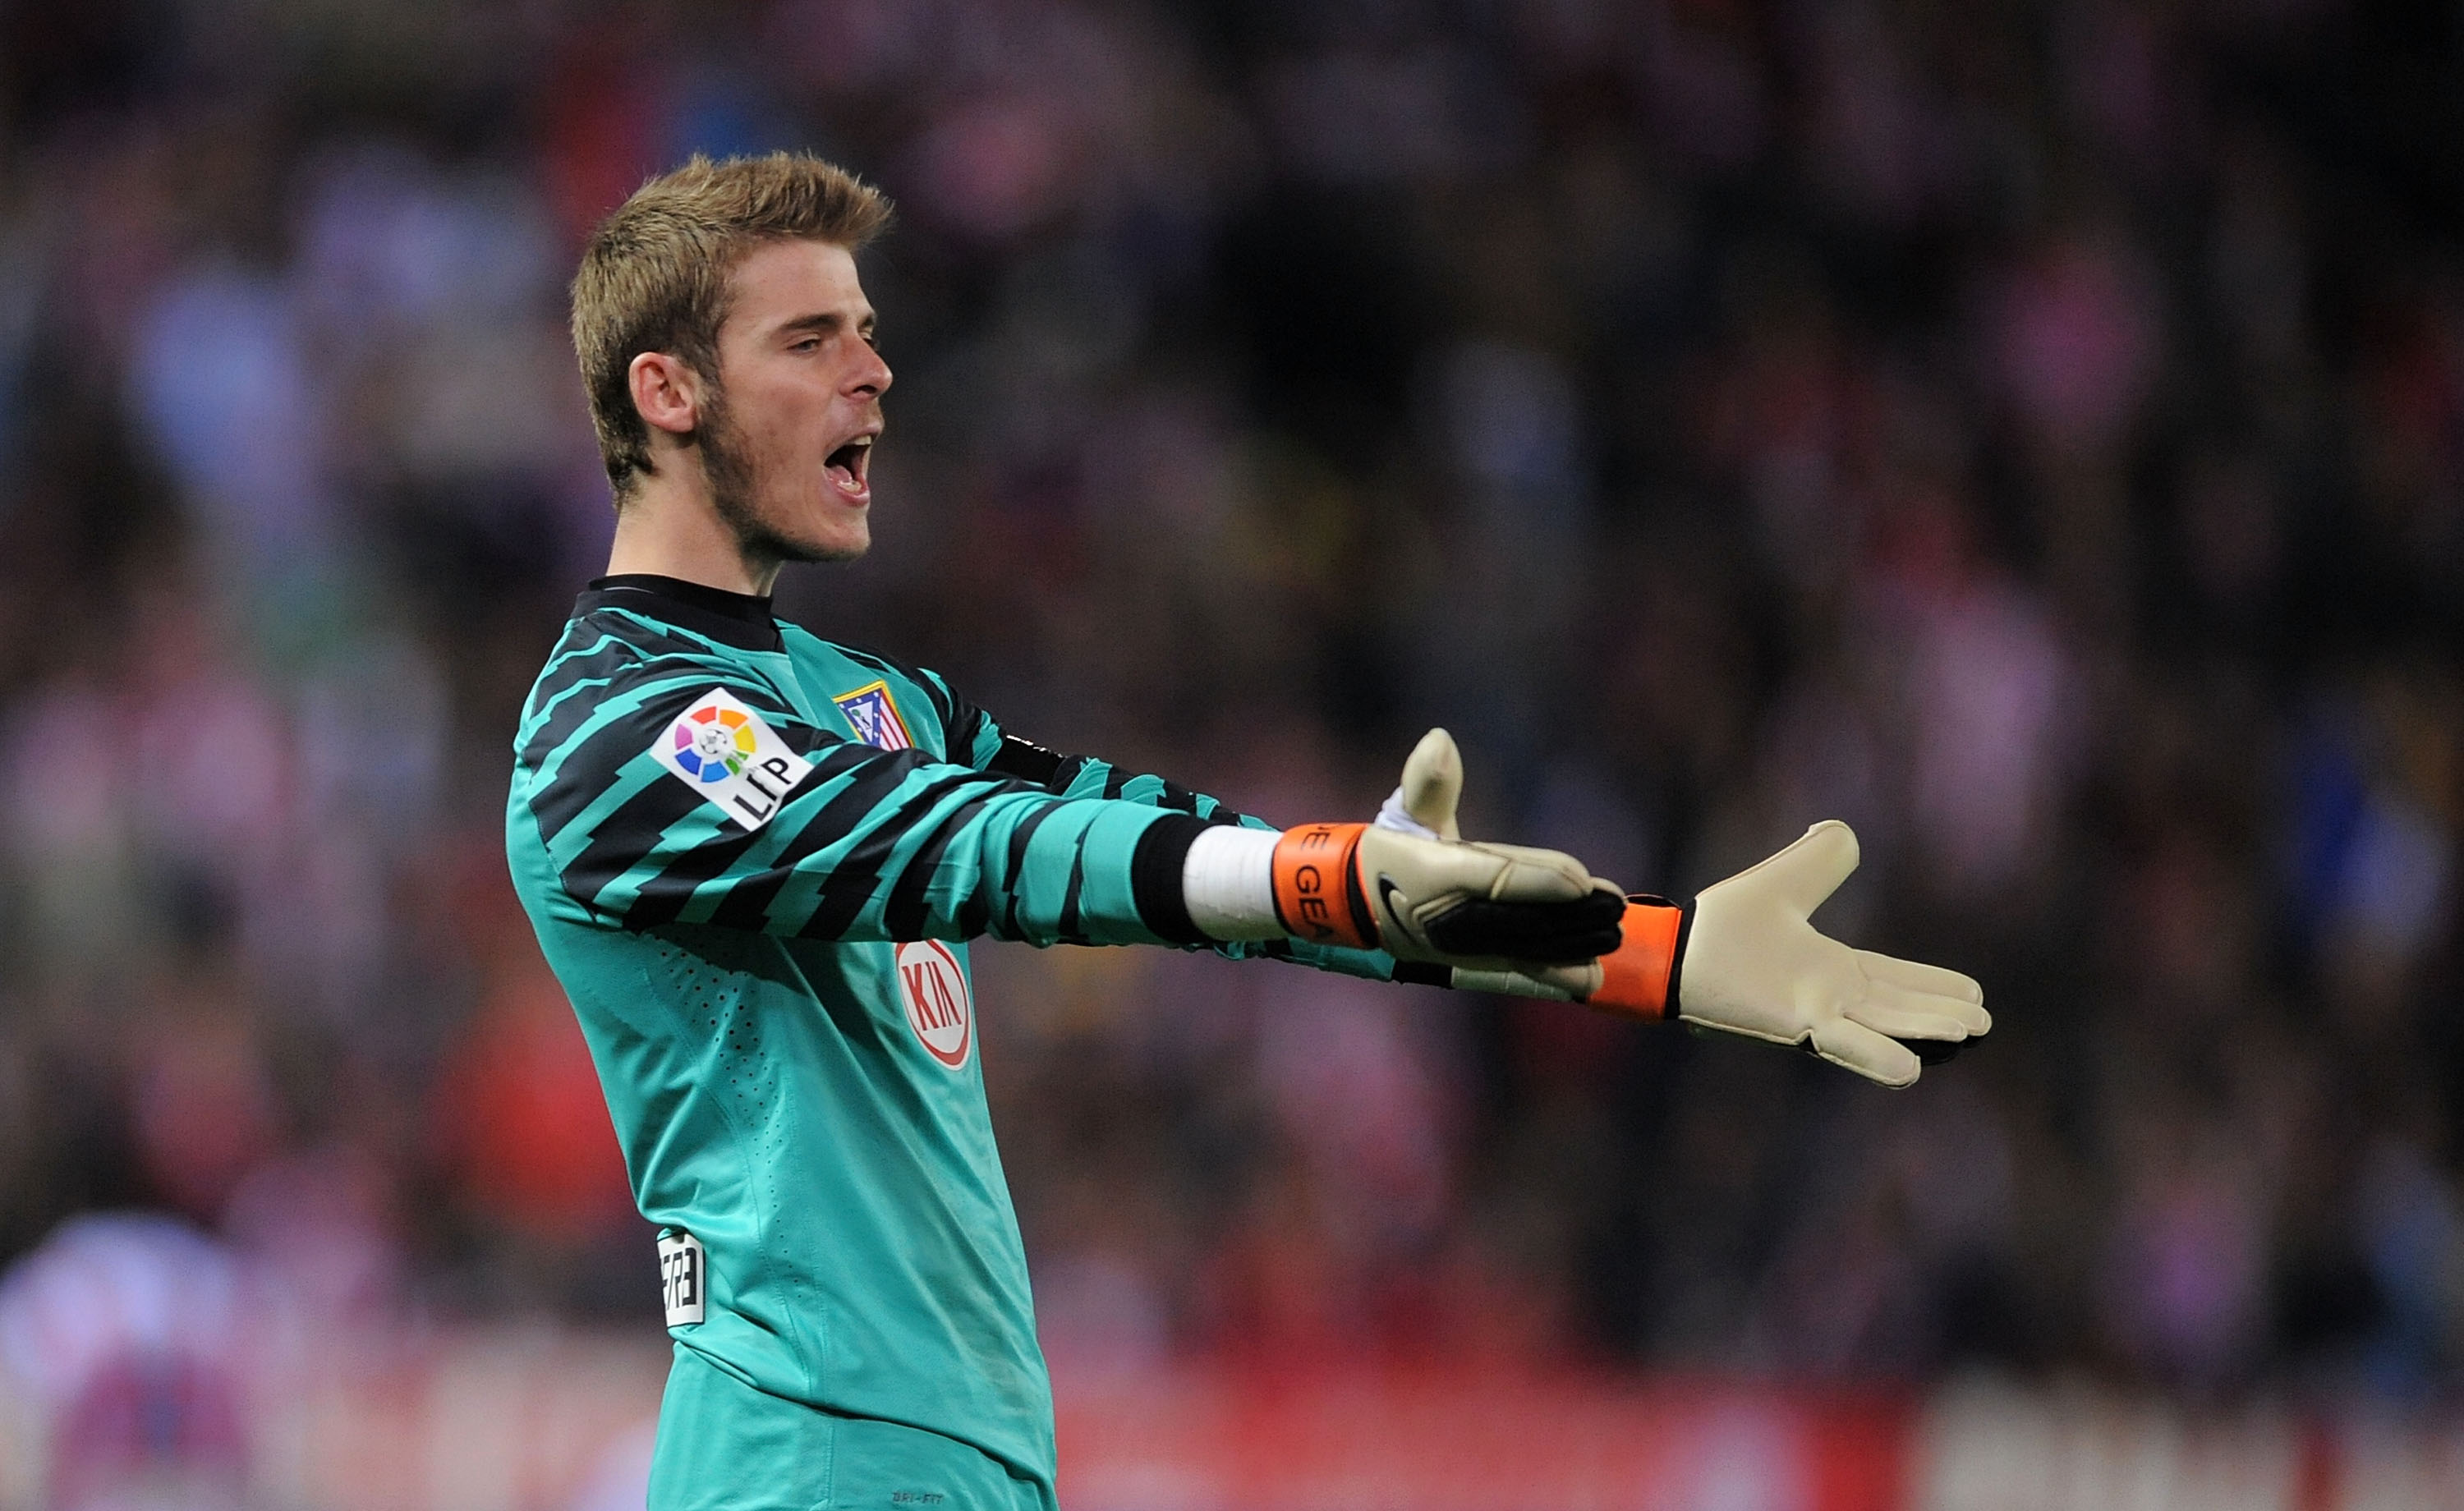 MADRID, SPAIN - MARCH 19: David De Gea of Atletico Madrid reacts during the La Liga match between Atletico Madrid and Real Madrid at Vicente Calderon Stadium on March 19, 2011 in Madrid, Spain.  (Photo by Denis Doyle/Getty Images)